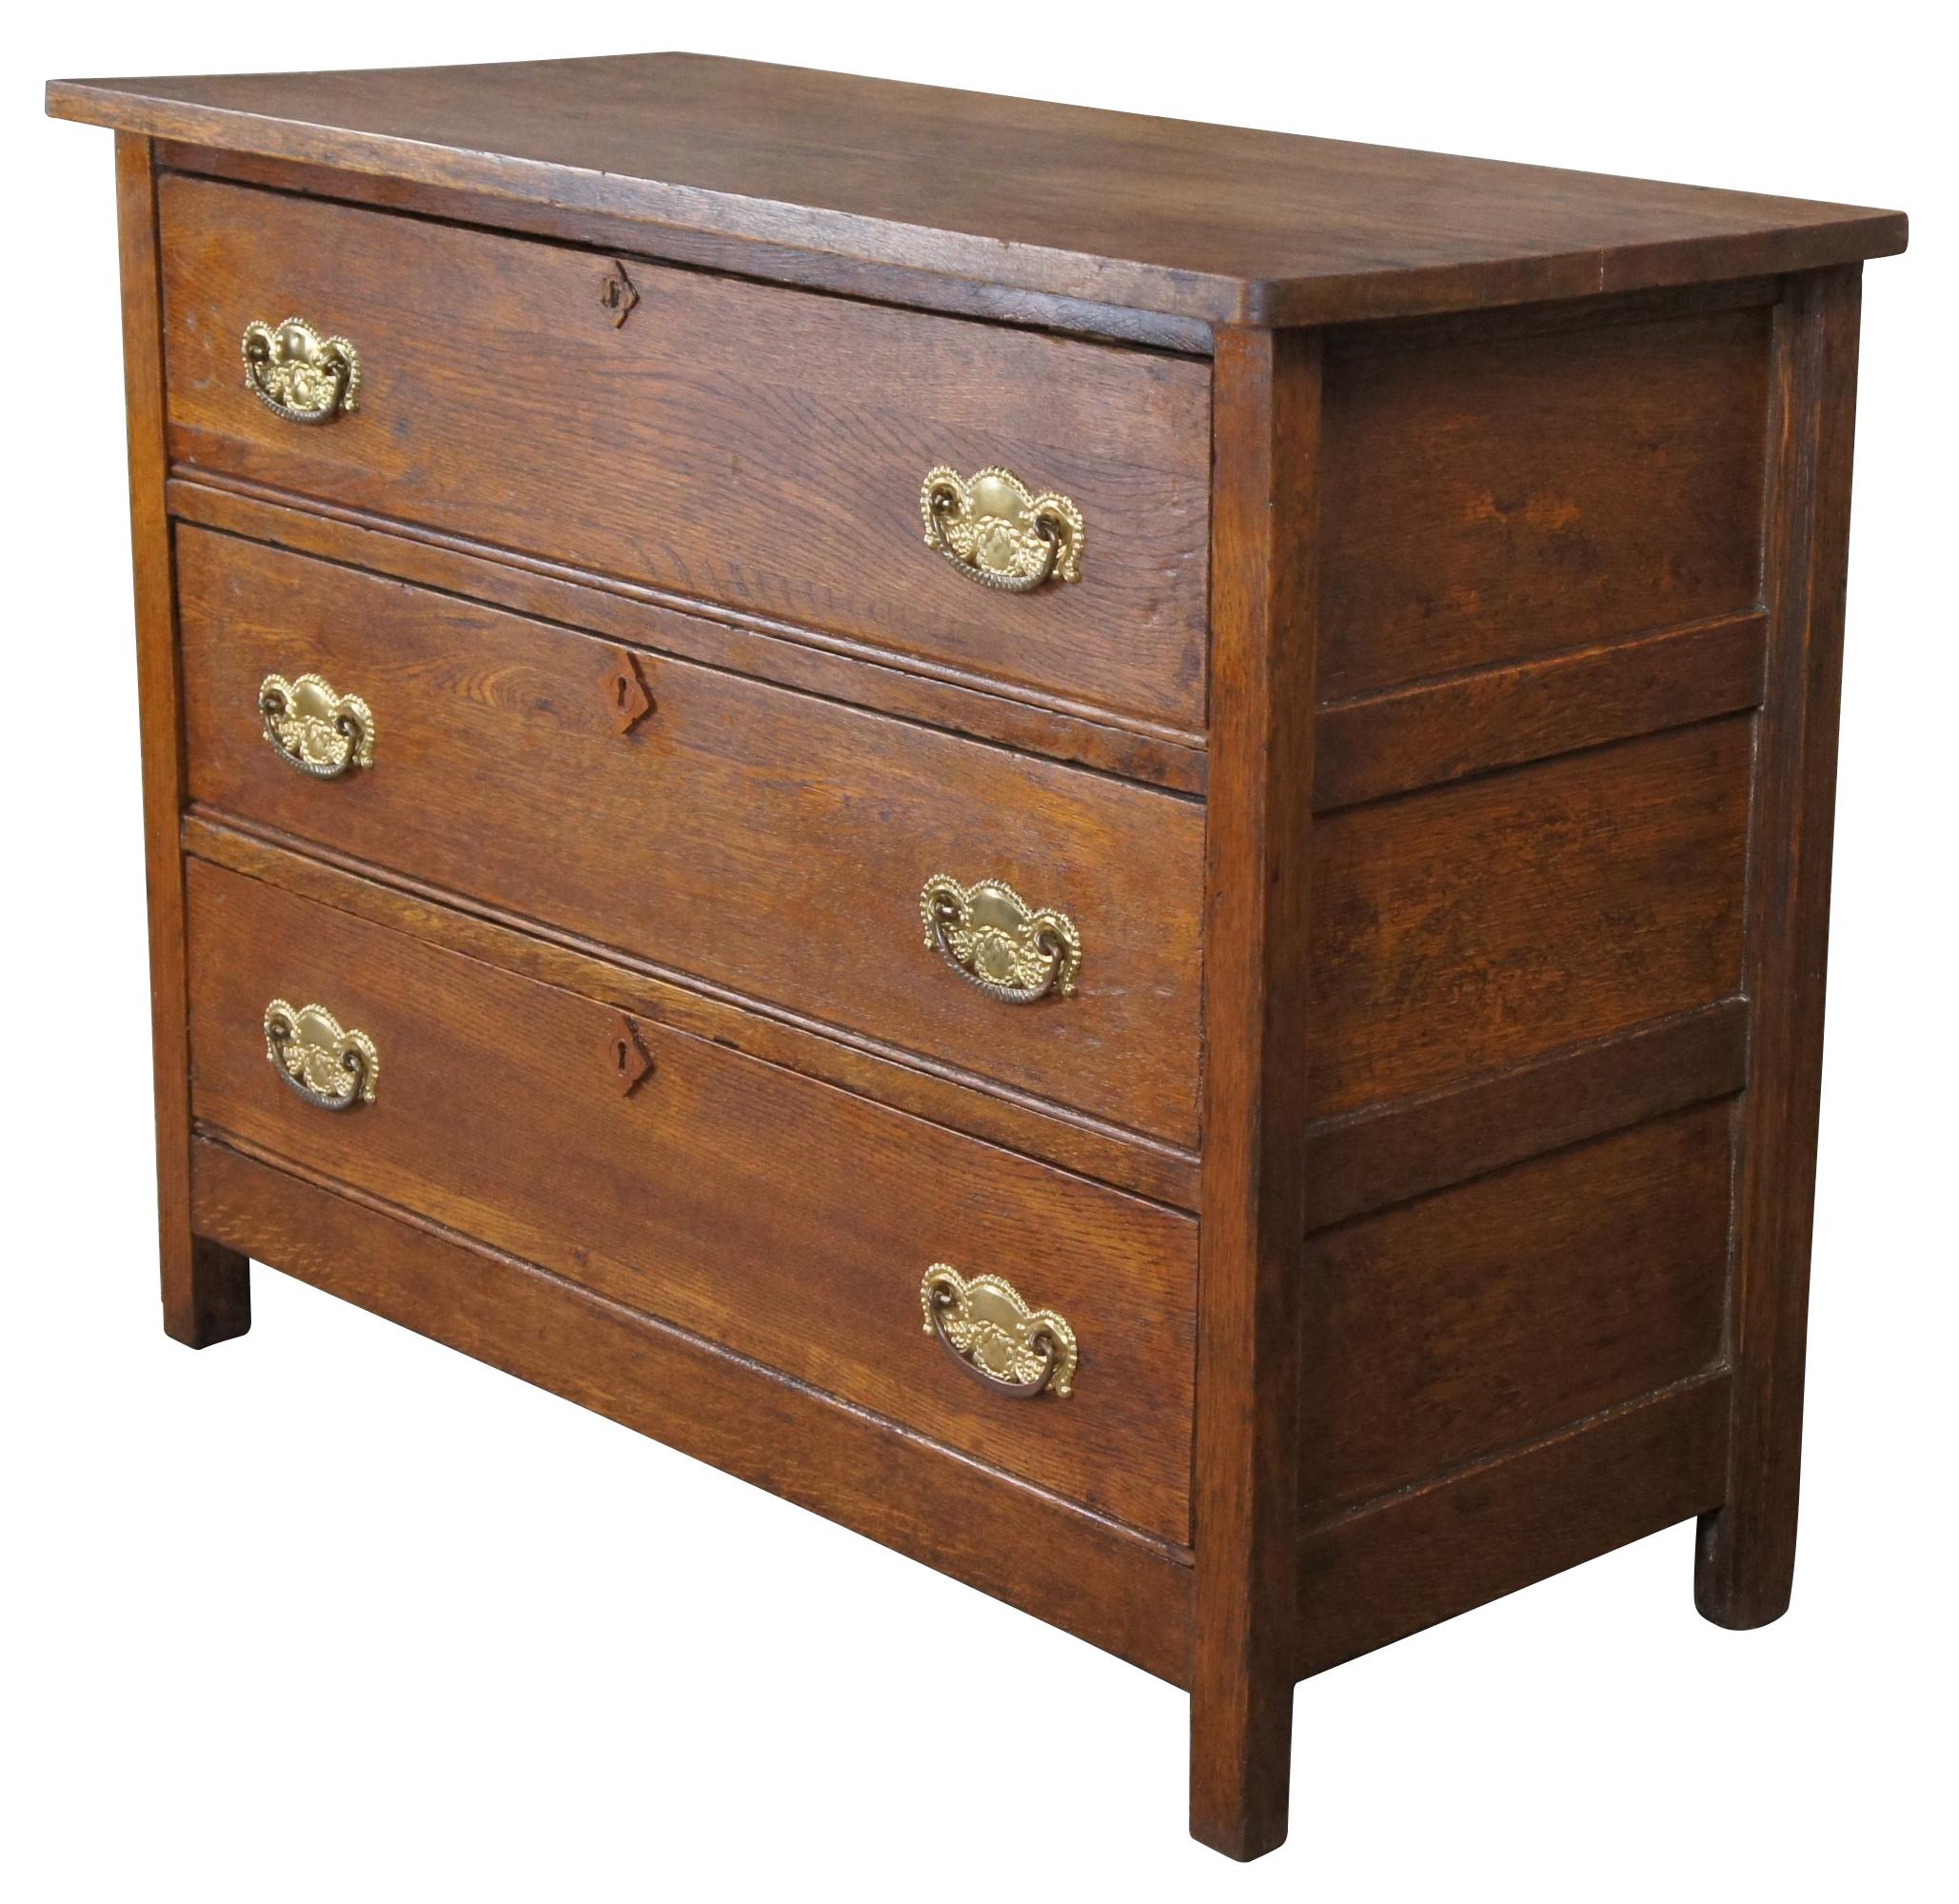 Antique late Victorian dresser or chest of drawers. Features three dovetailed drawers with ornate hardware, diamond raised escutcheons and paneled sides.